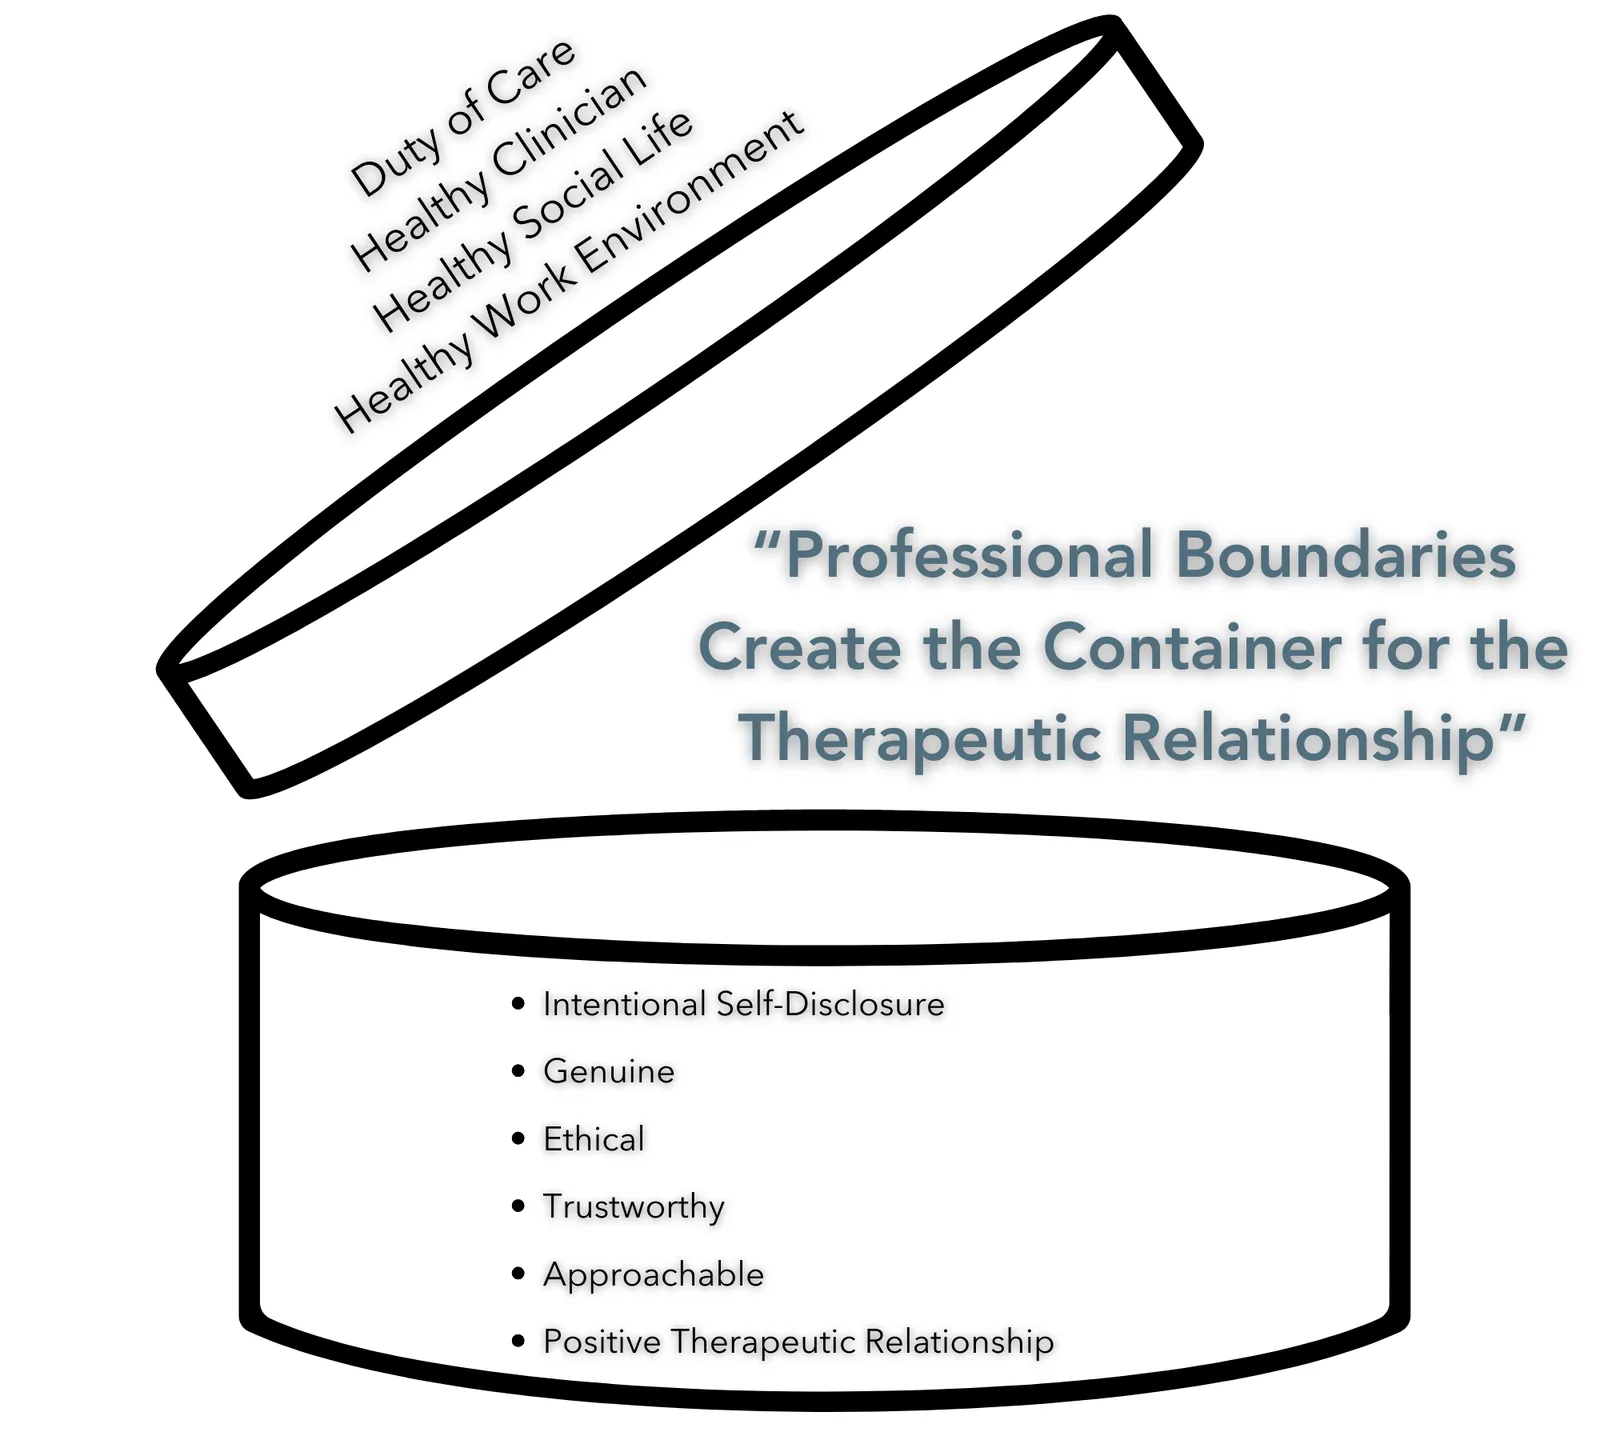 “Professional Boundaries Create the Container for the Therapeutic Relationship”